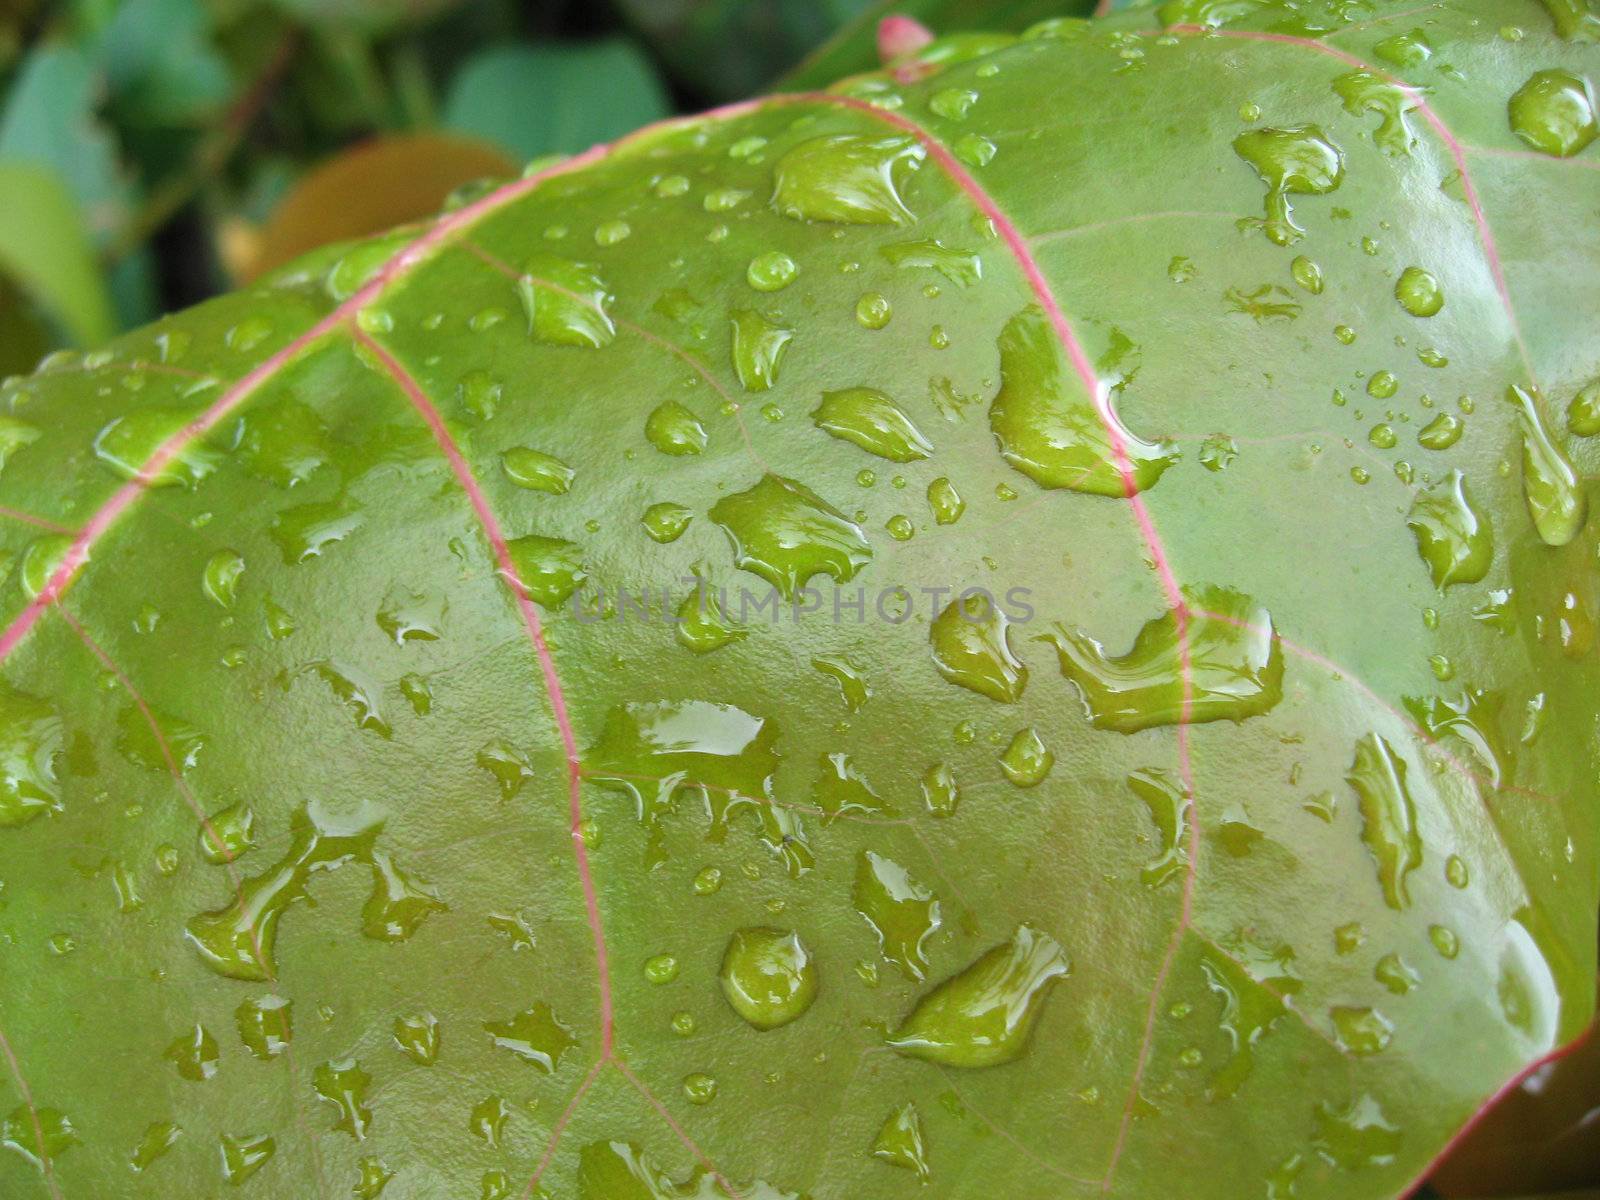 Many drops on a leaf after a thunderstorm in the Keys